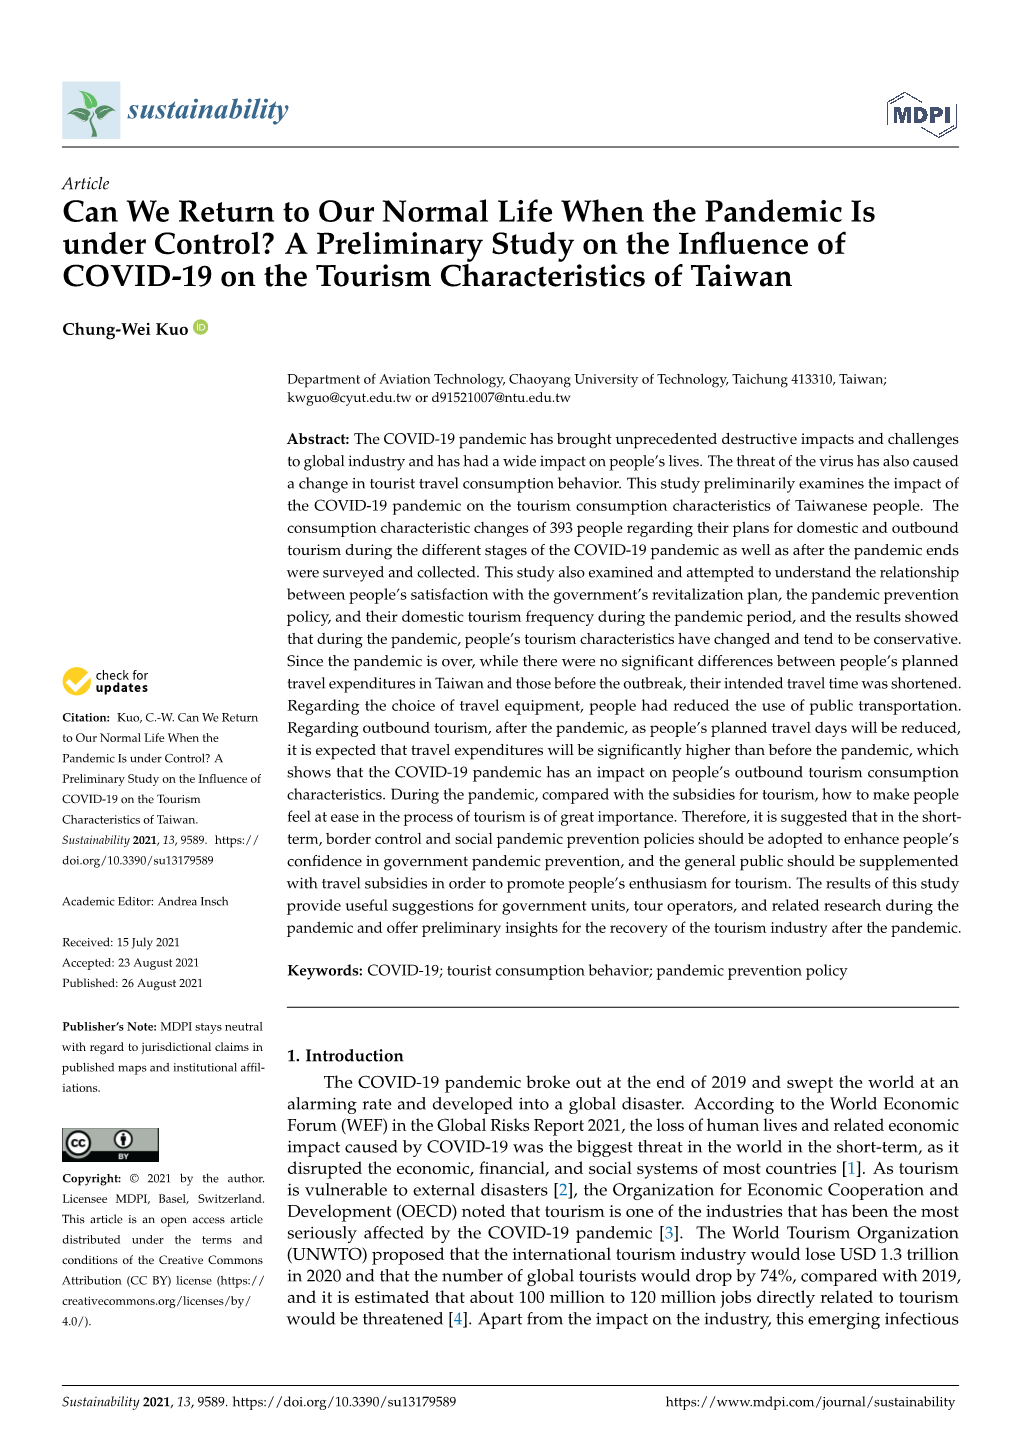 A Preliminary Study on the Influence of COVID-19 on The